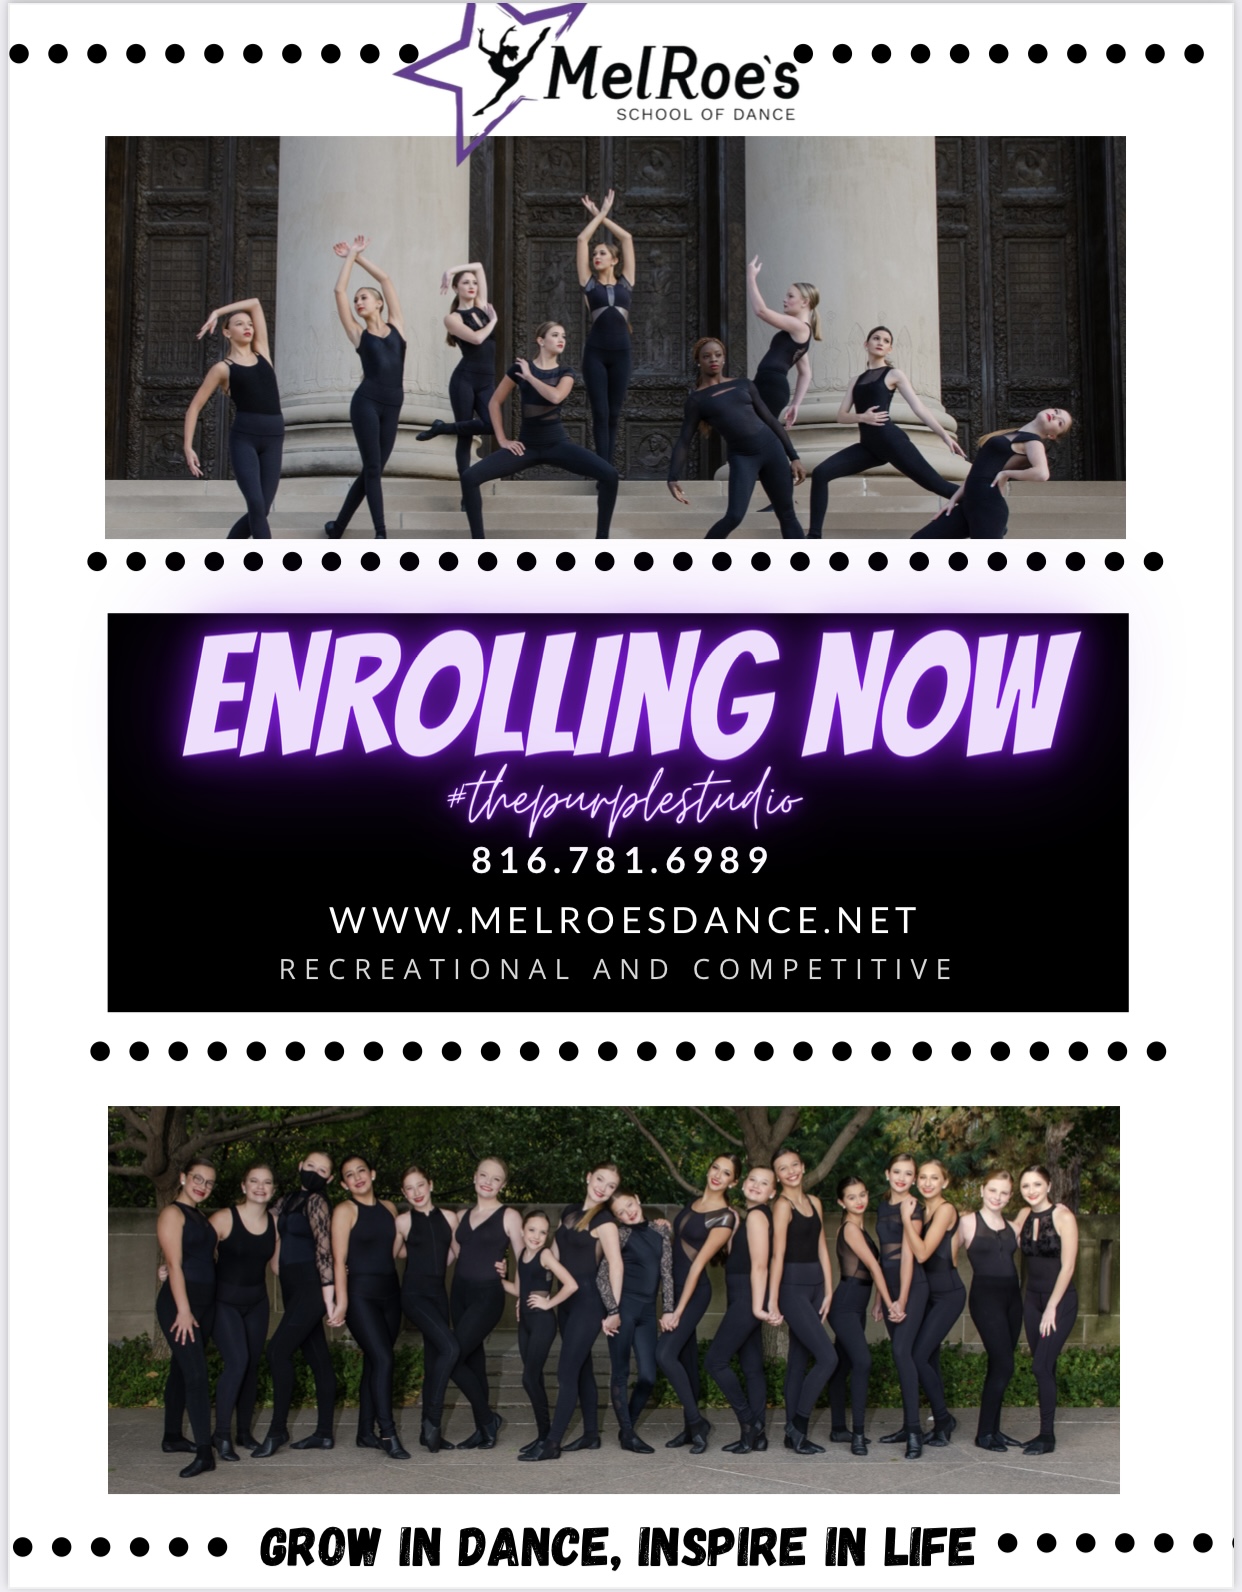 ENROLLING NOW for MelRoe's School of Dance in Liberty Missouri